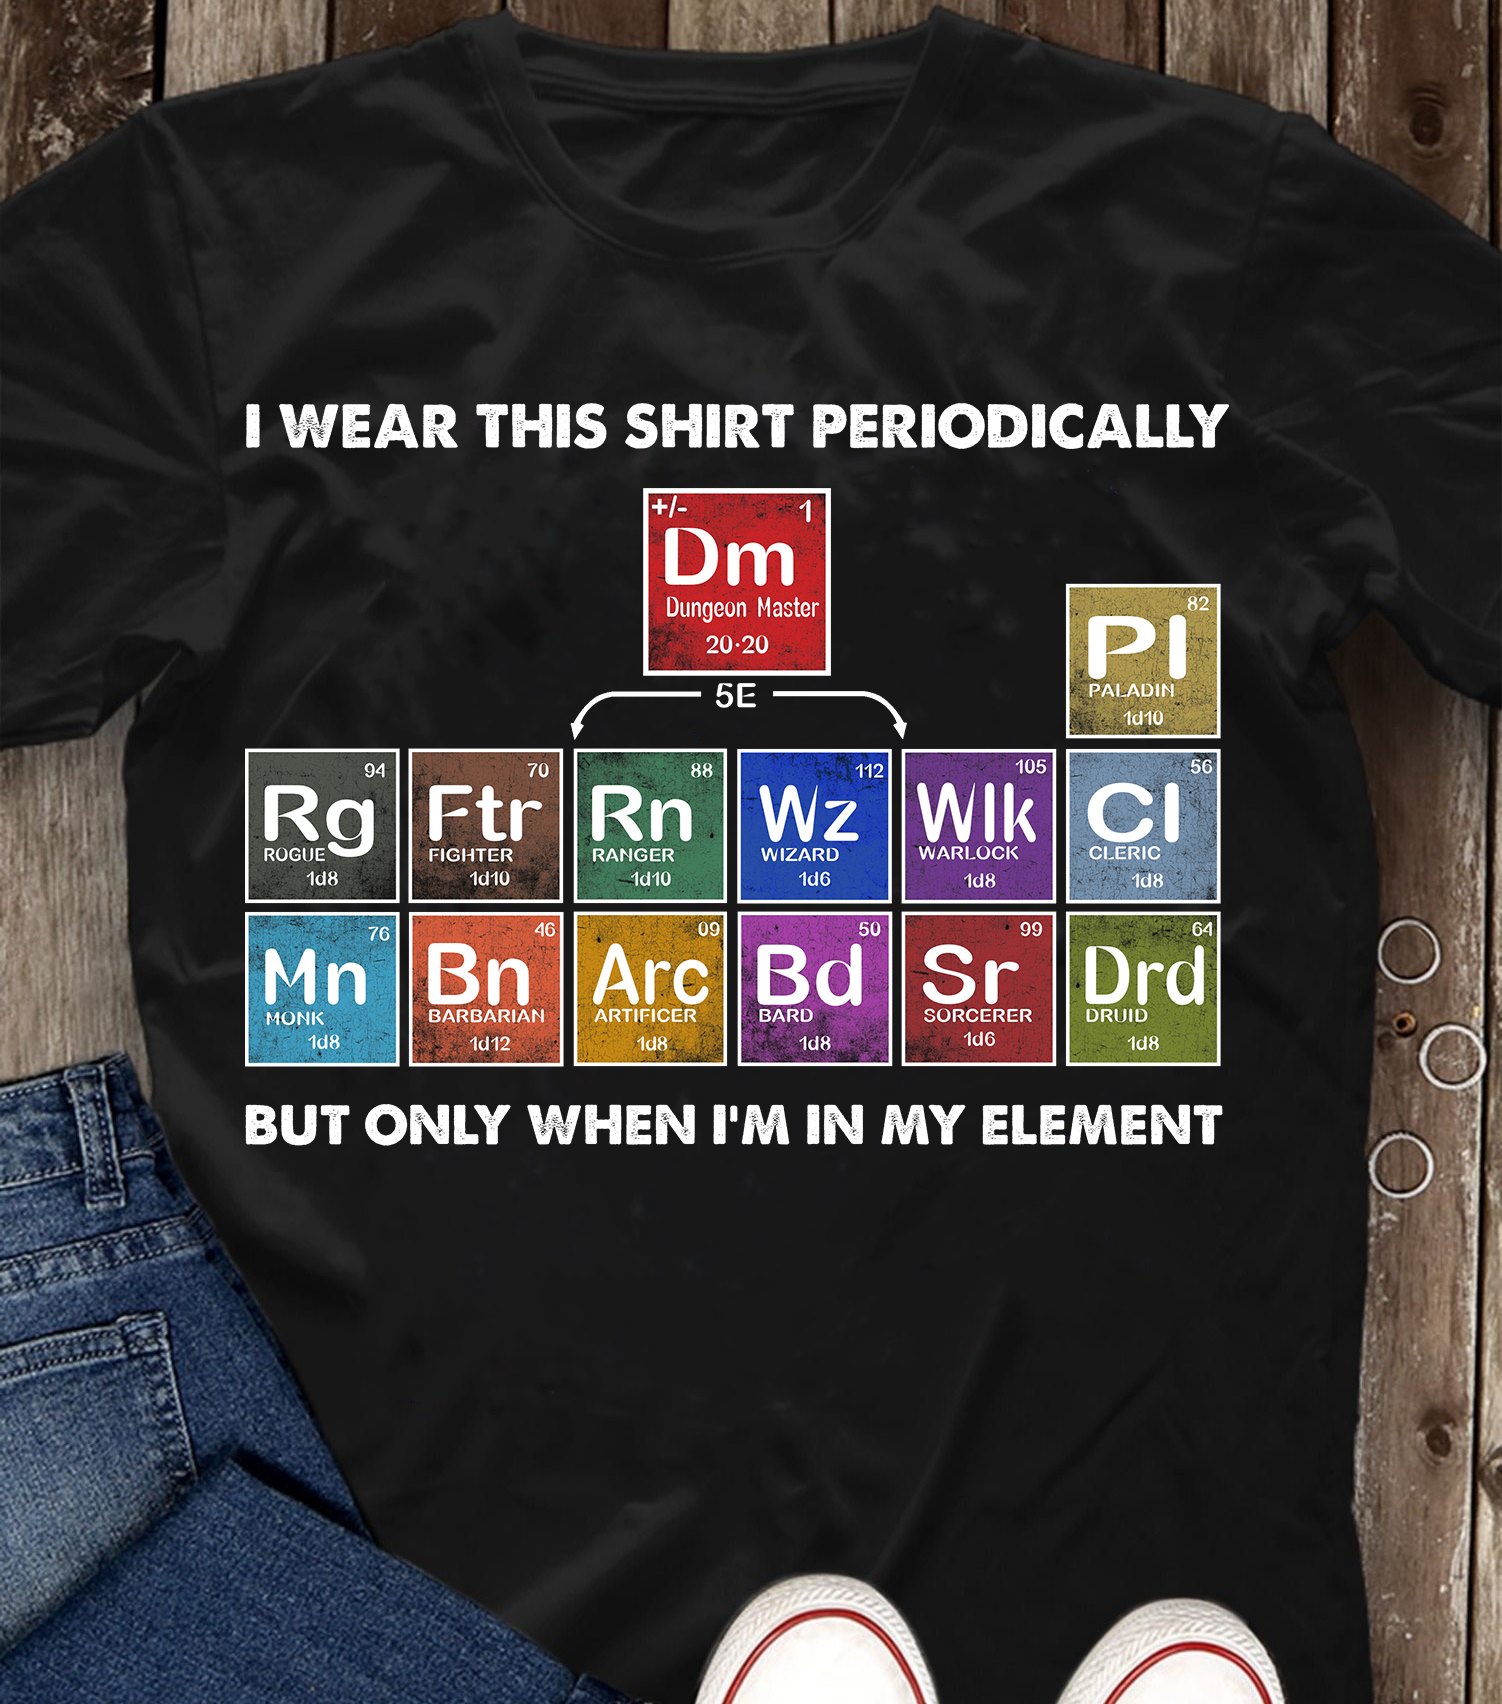 Table Of Chemical Elements - I wear this shirt periodically but only when i'm in my element